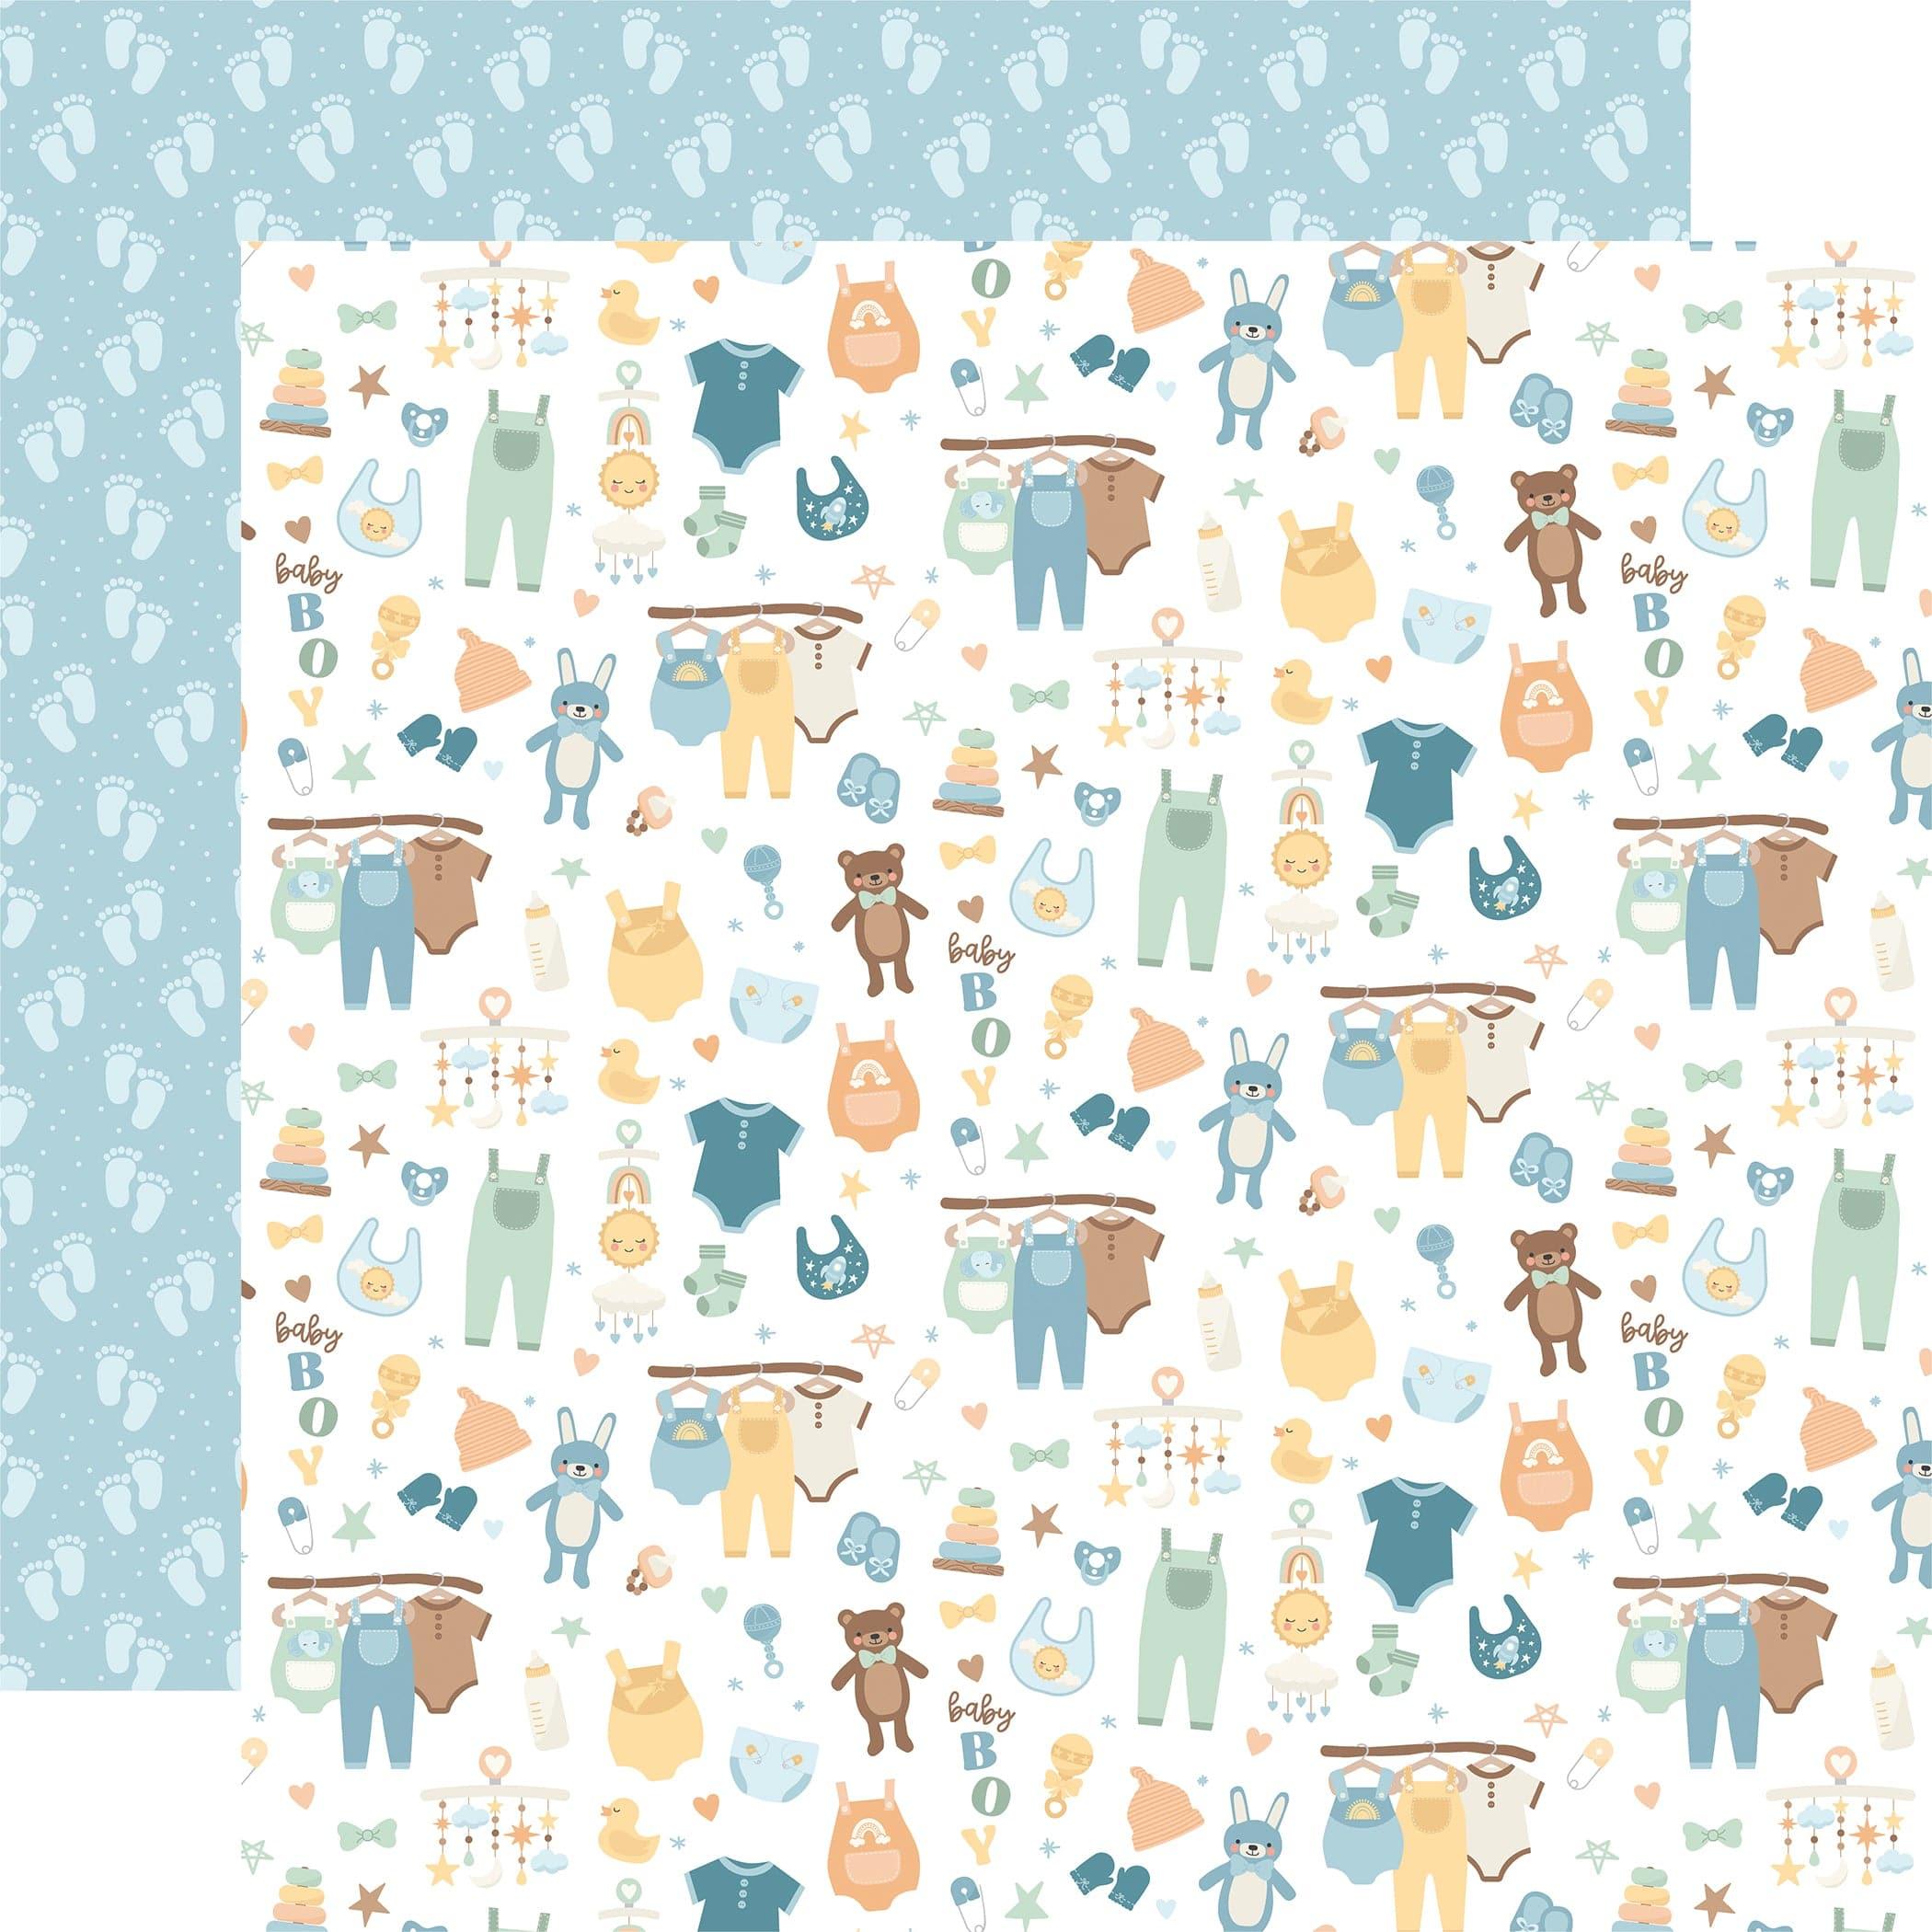 Baby Boy 12 x 12 paperpack  scrapbooking papers - Kinjal Creation